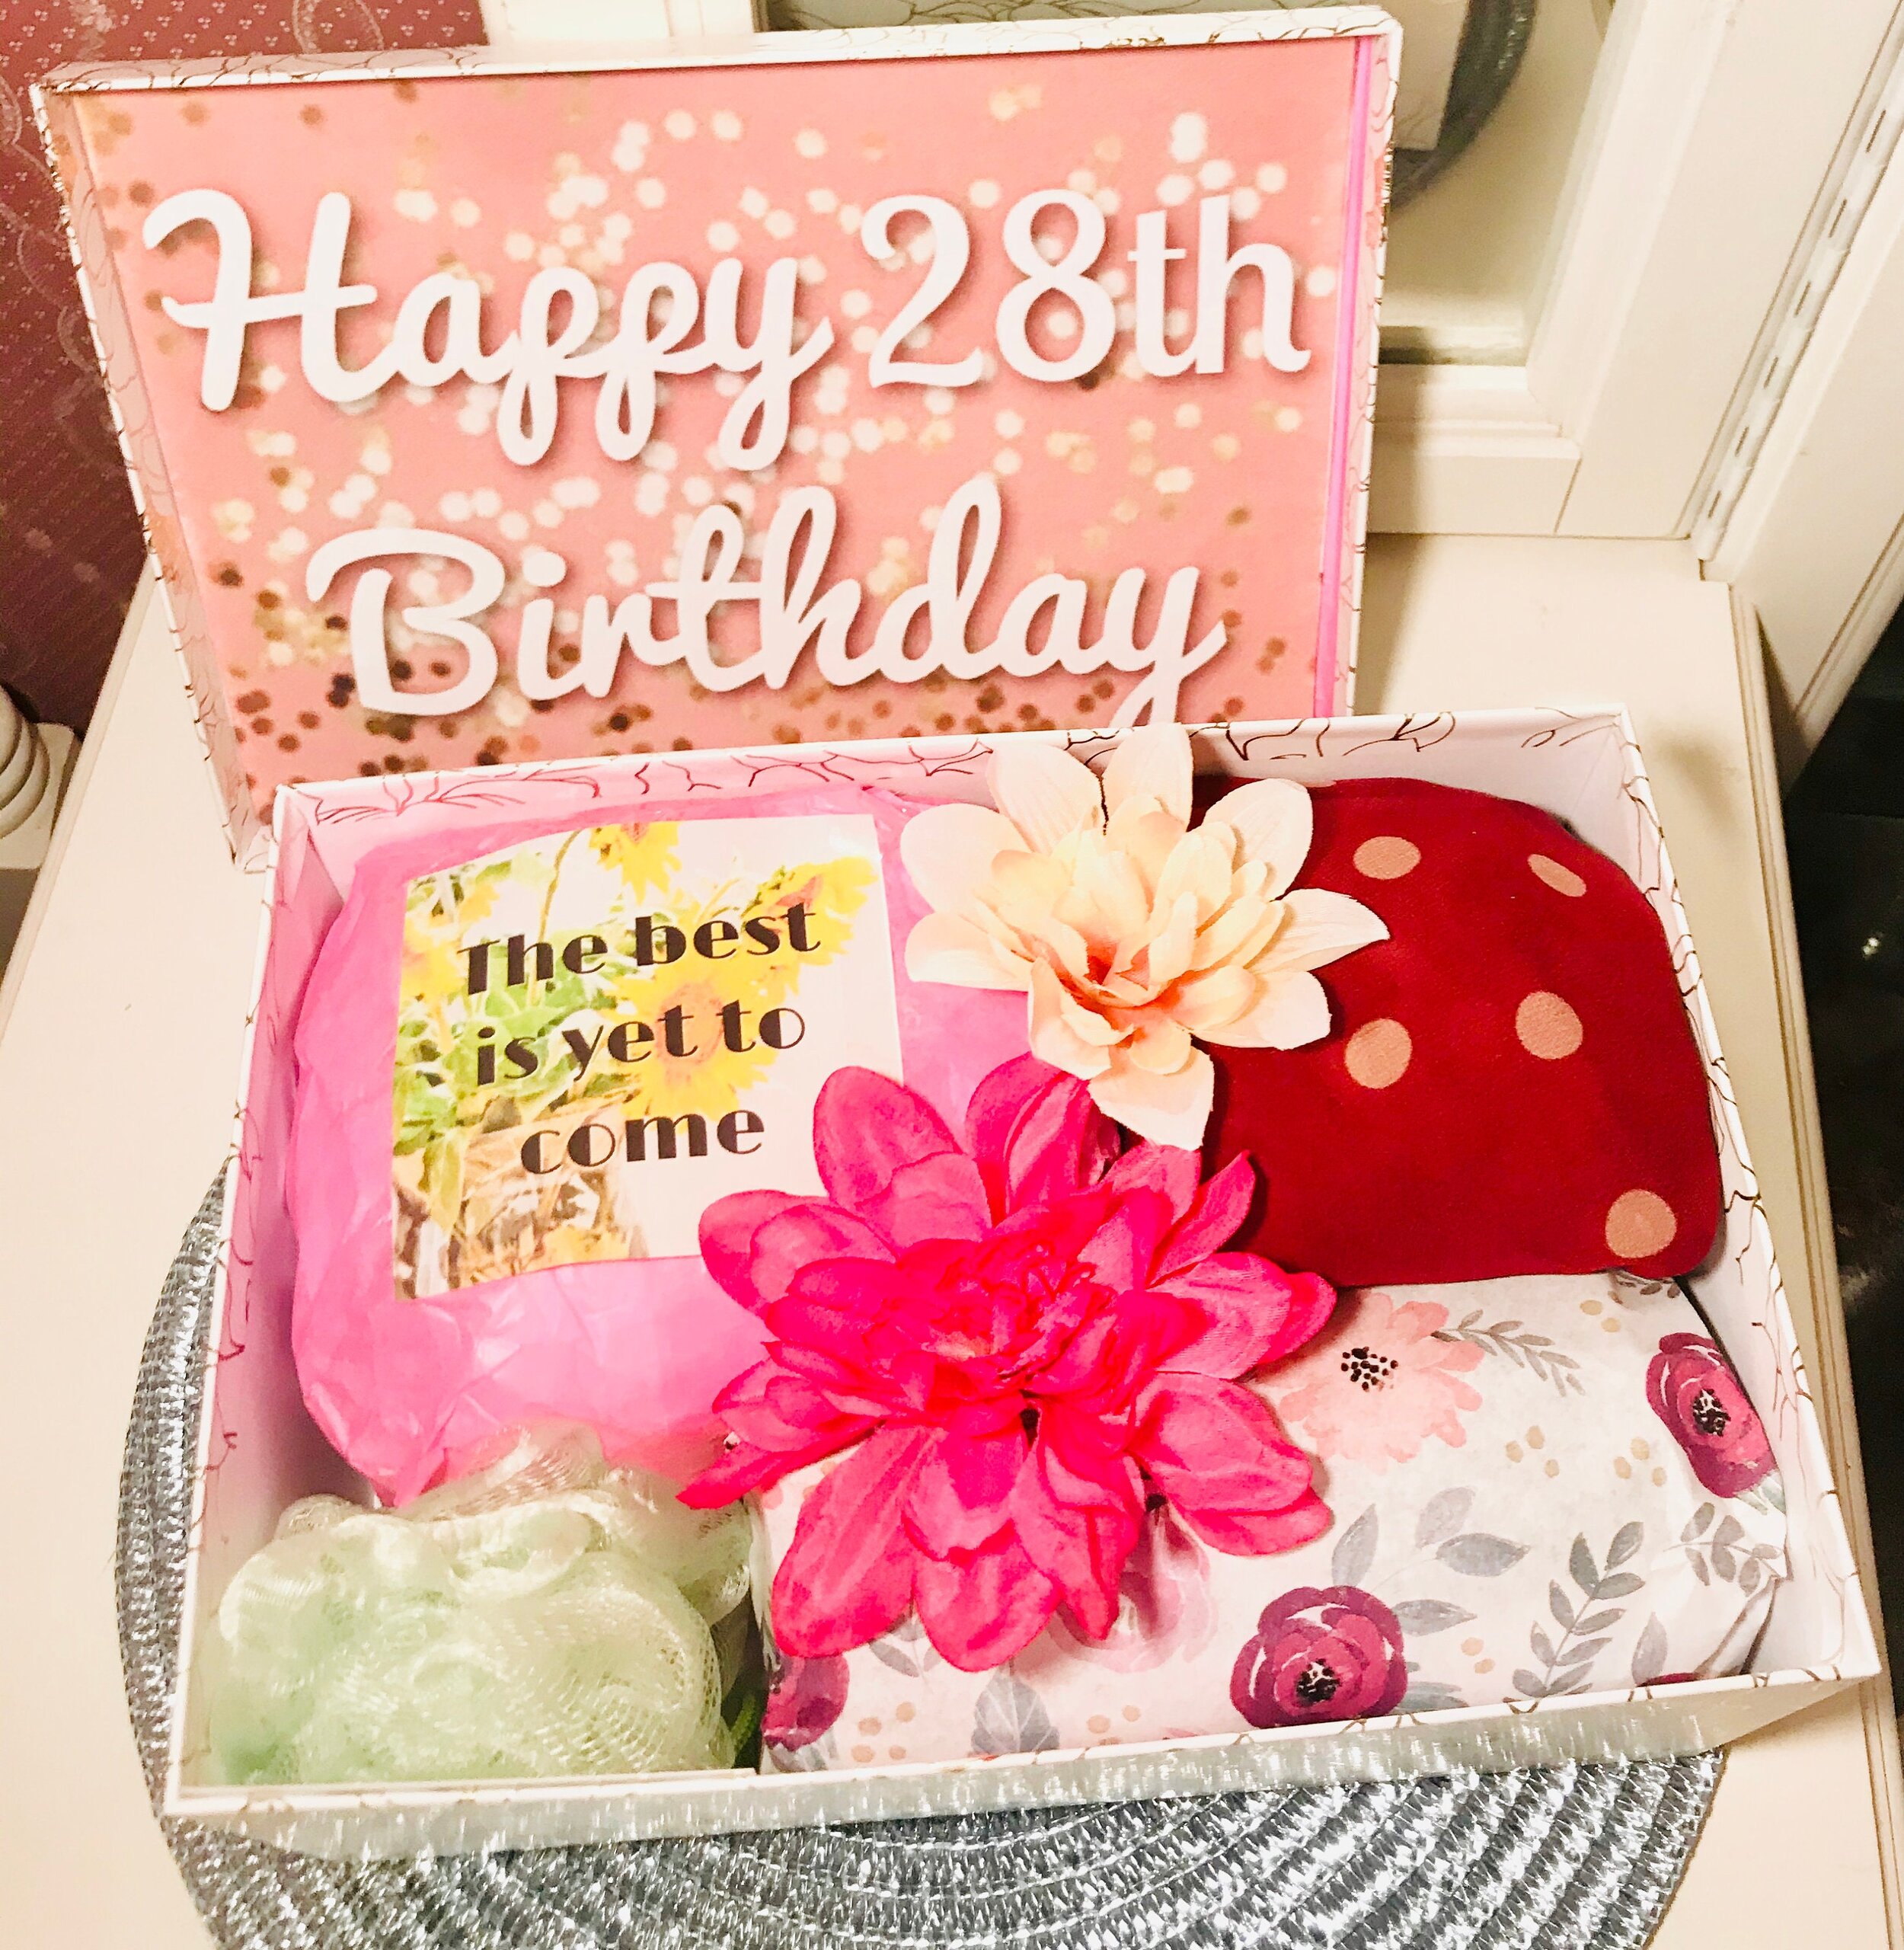 28th Birthday Birthday Care Package. Happy 28th Birthday YouAreBeautifulBox Birthday Gift Box Happy 20 GREAT 28th Birthday Gift for Her